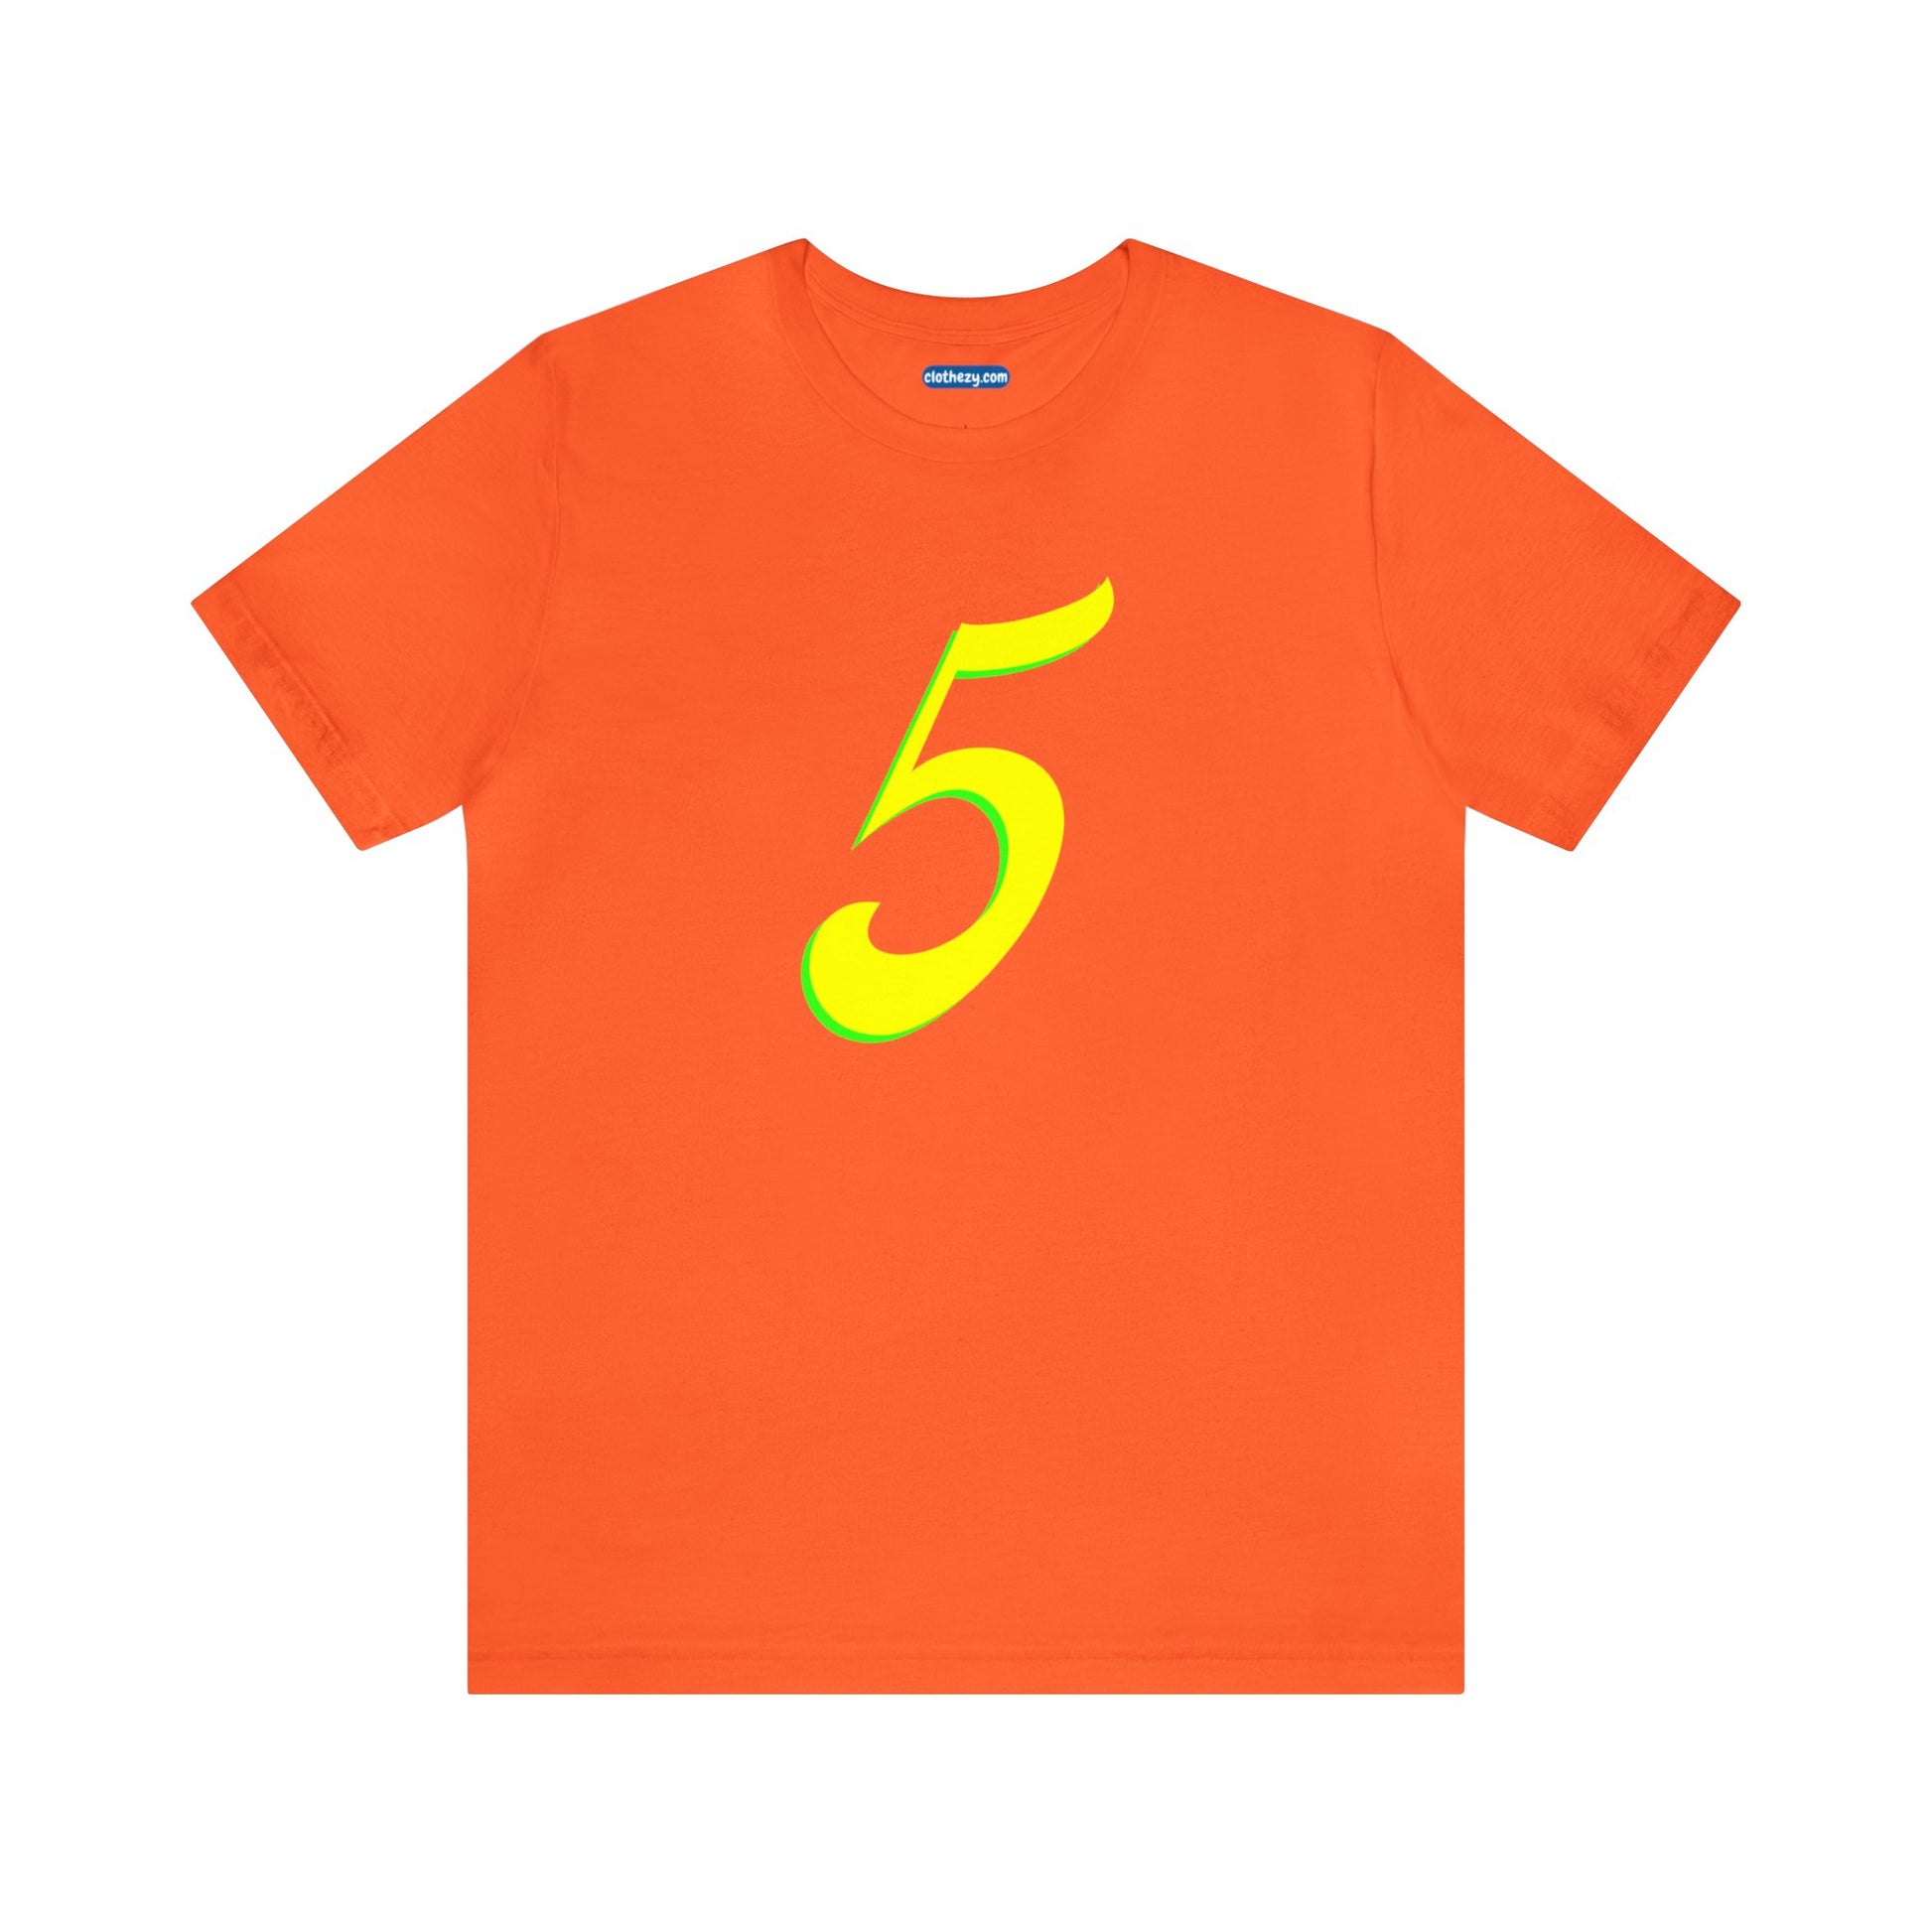 Number 5 Design - Soft Cotton Tee for birthdays and celebrations, Gift for friends and family, Multiple Options by clothezy.com in Orange Size Small - Buy Now